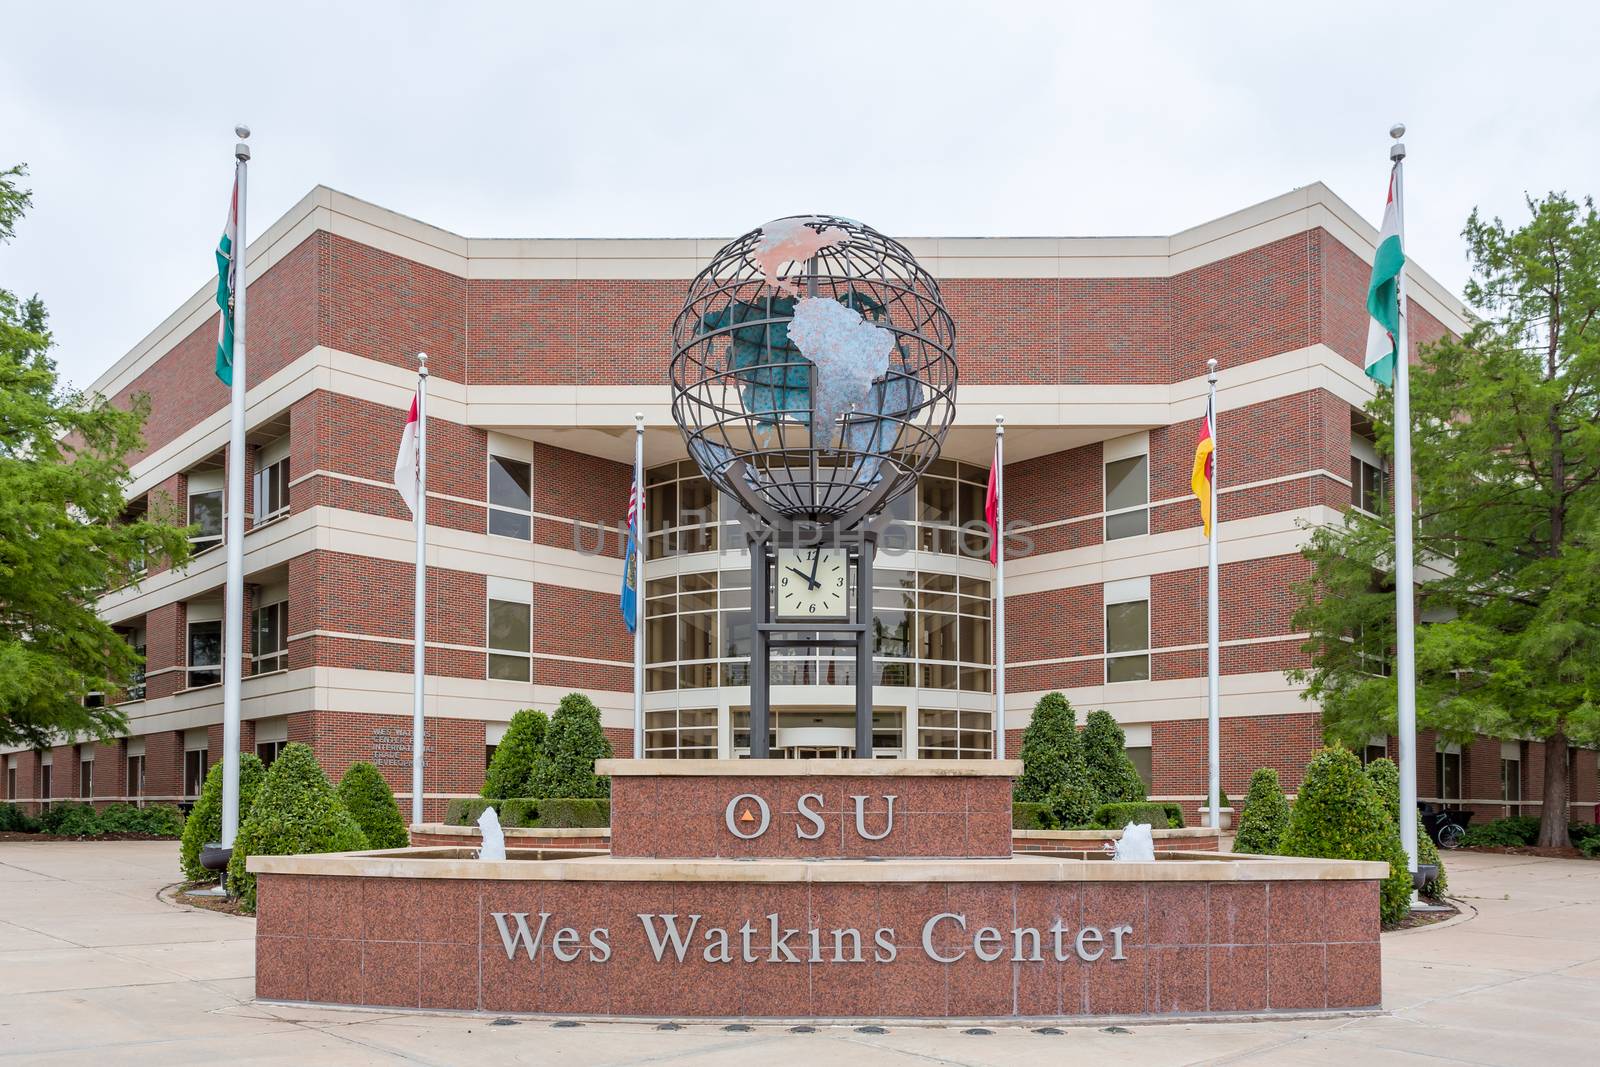 Wes Watkins Center at Oklahoma State University by wolterk